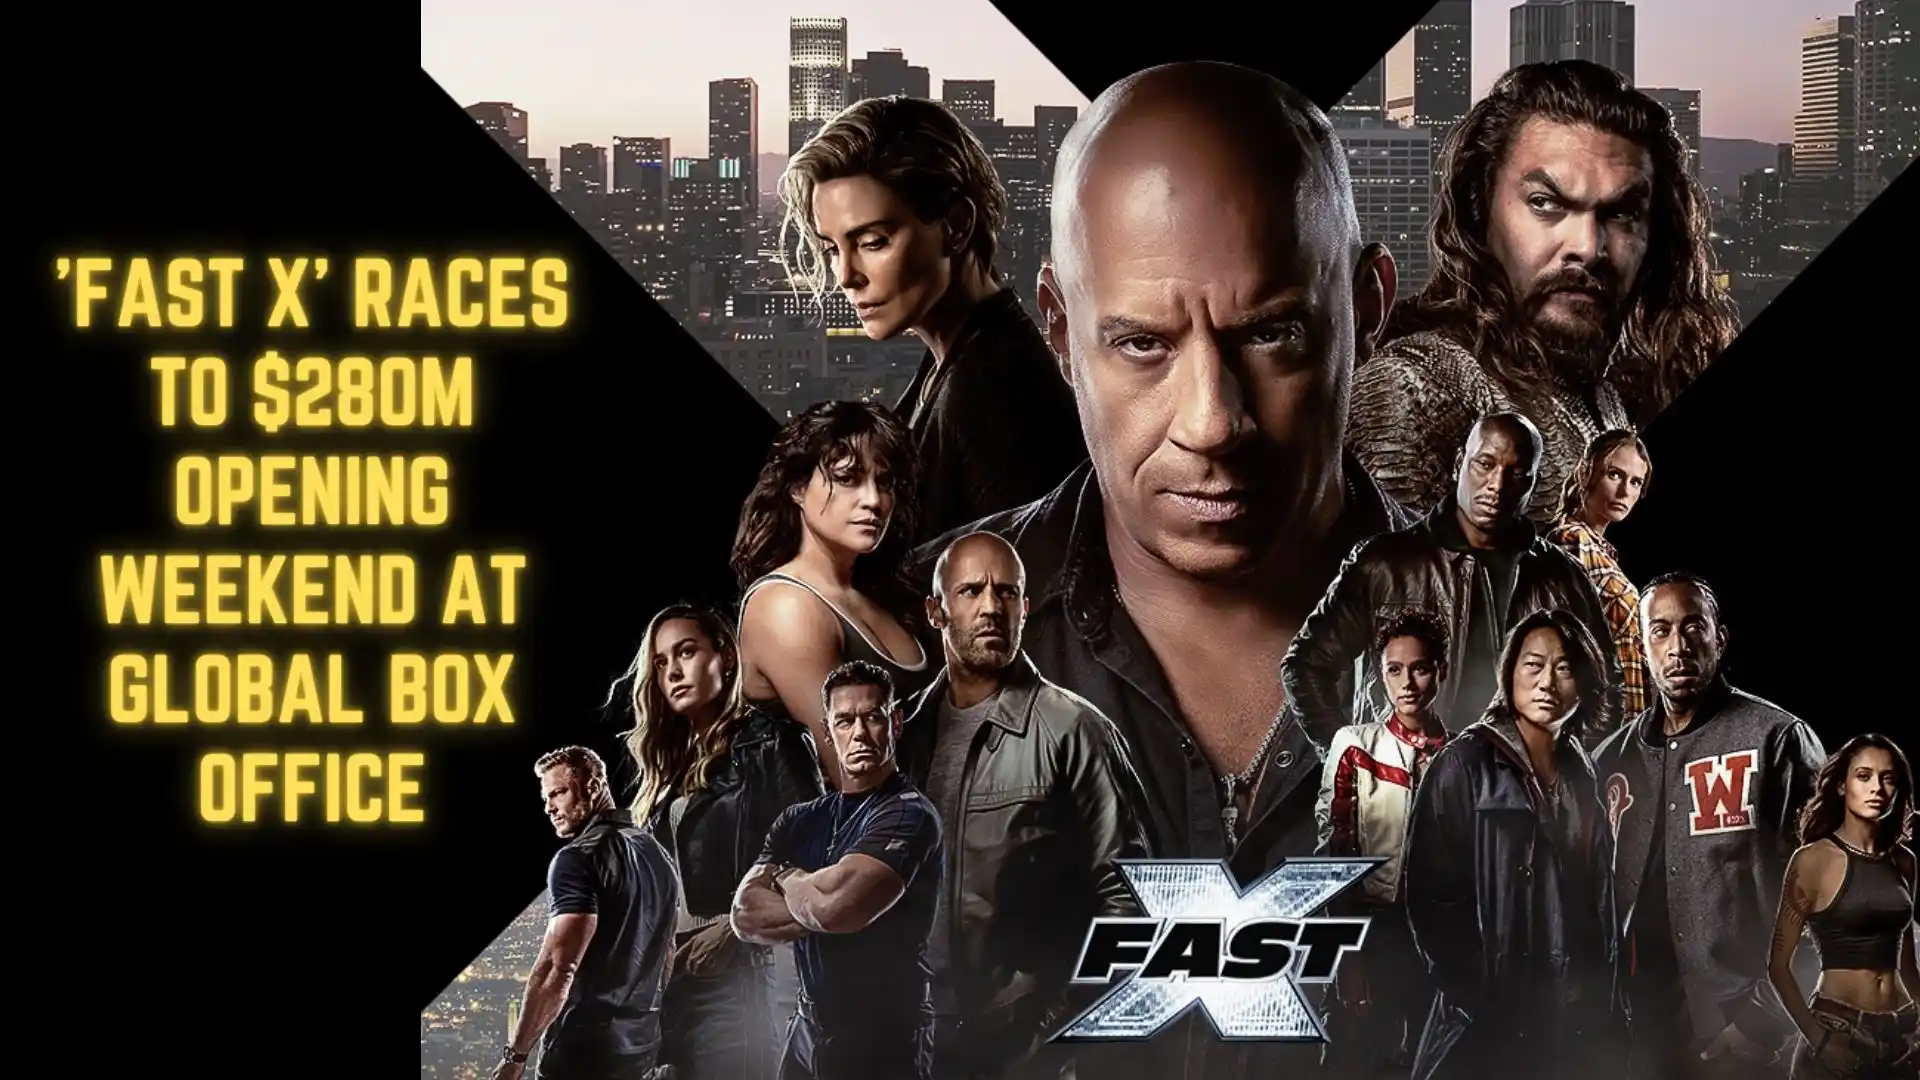 'Fast X' Races to $280M Opening Weekend at Global Box Office